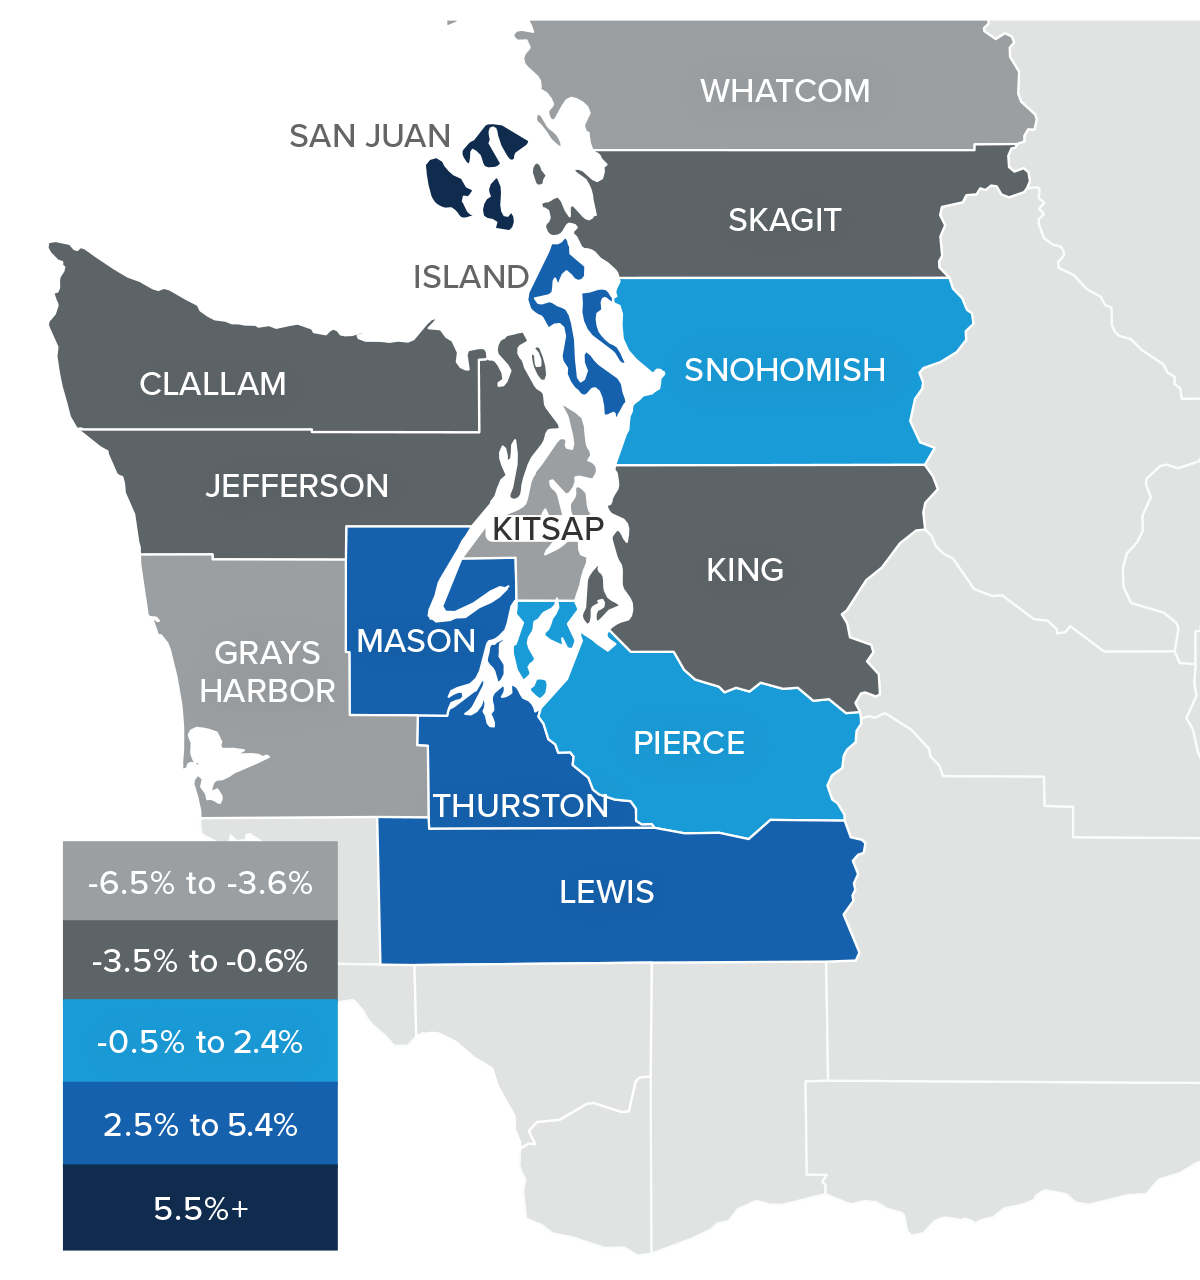 A map showing the real estate home prices percentage changes for various counties in Western Washington. Different colors correspond to different tiers of percentage change. Grays Harbor and Whatcom Counties have a percentage change in the -6.5% to -3.6%+ range, Clallam, Jefferson, King, and Skagit counties are in the -3.5% to -0.6% change range, Snohomish and Pierce are in the -0.5% to 2.4% change range, Mason, Thurston, Island, and Lewis counties are in the 2.5% to 5.4% change range, and San Juan County is in the 5.5%+ change range.